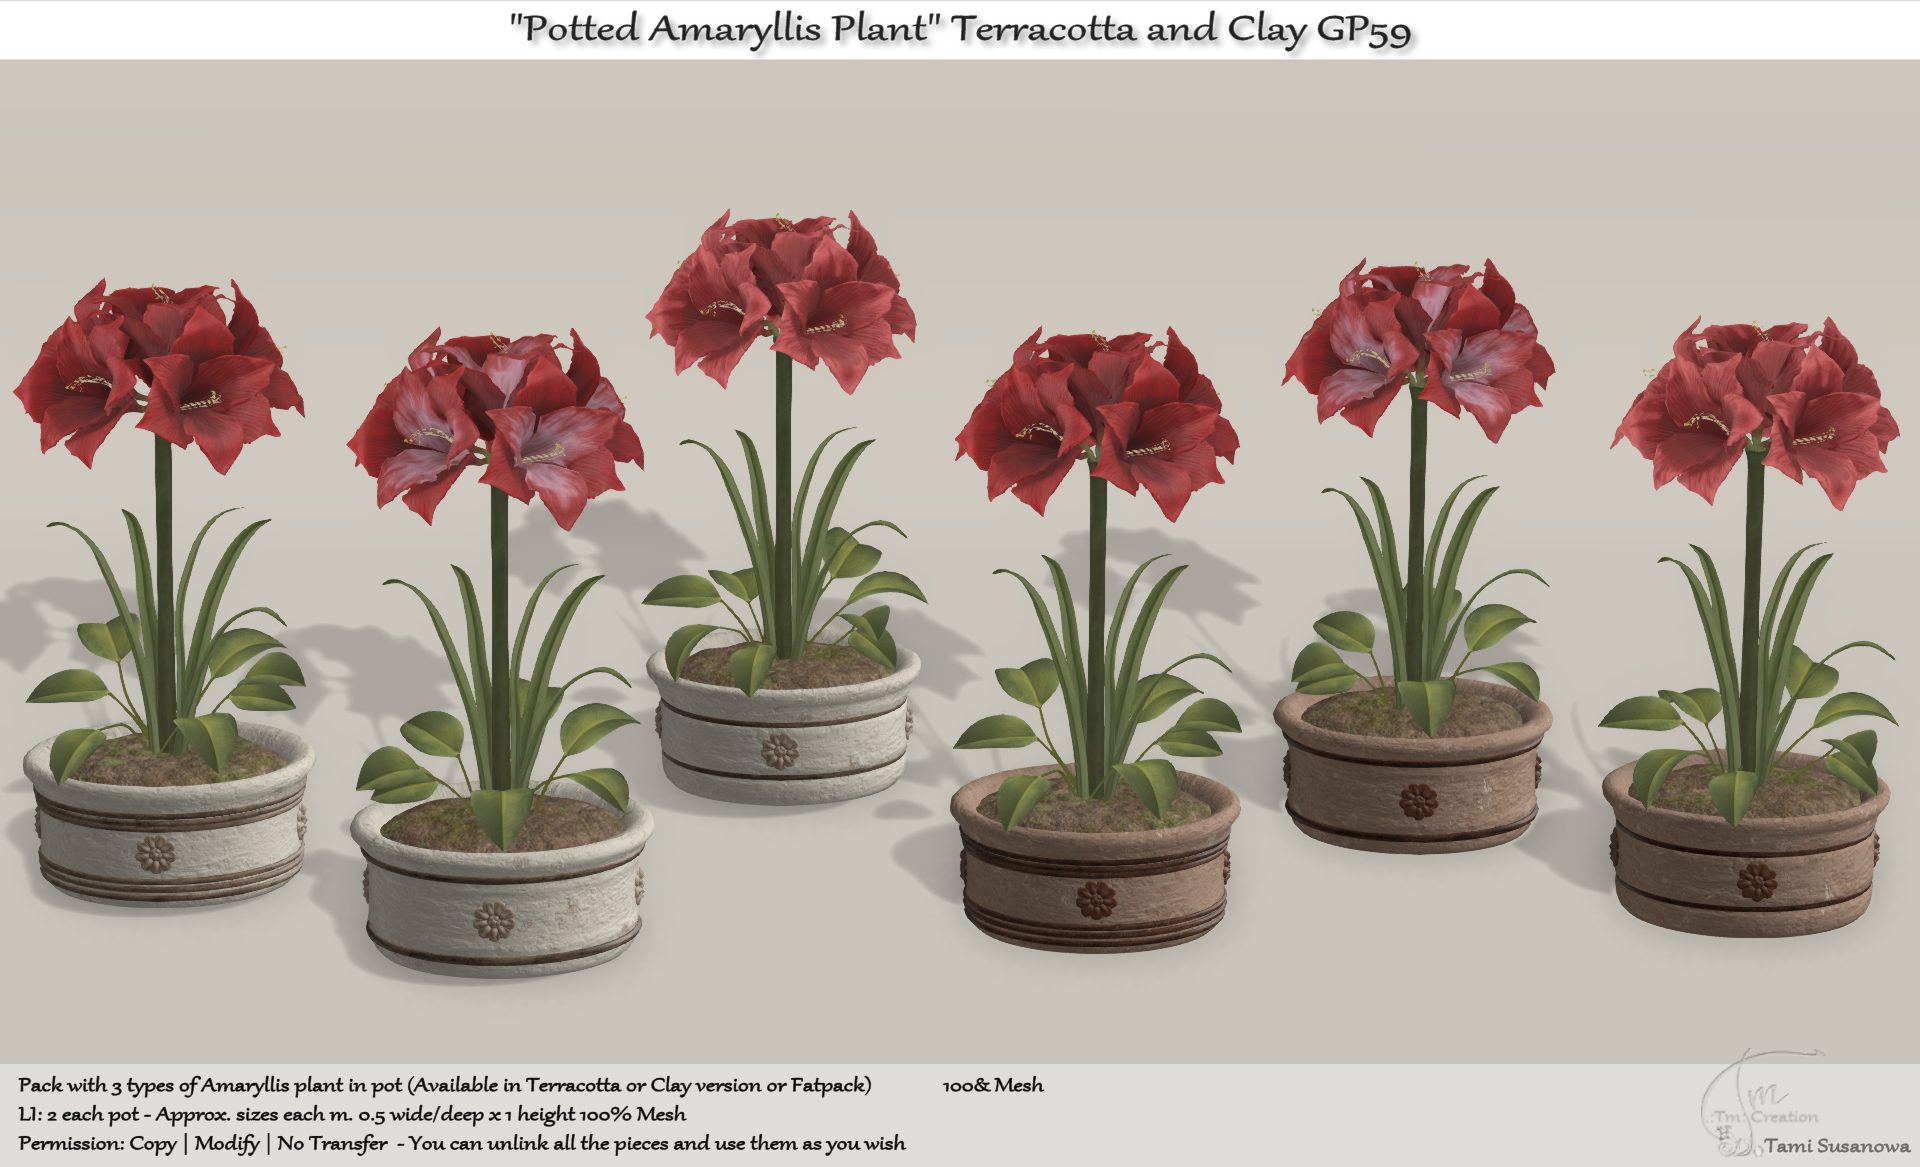 TM Creation – “Potted Amaryllis Plant” Terracotta and Clay